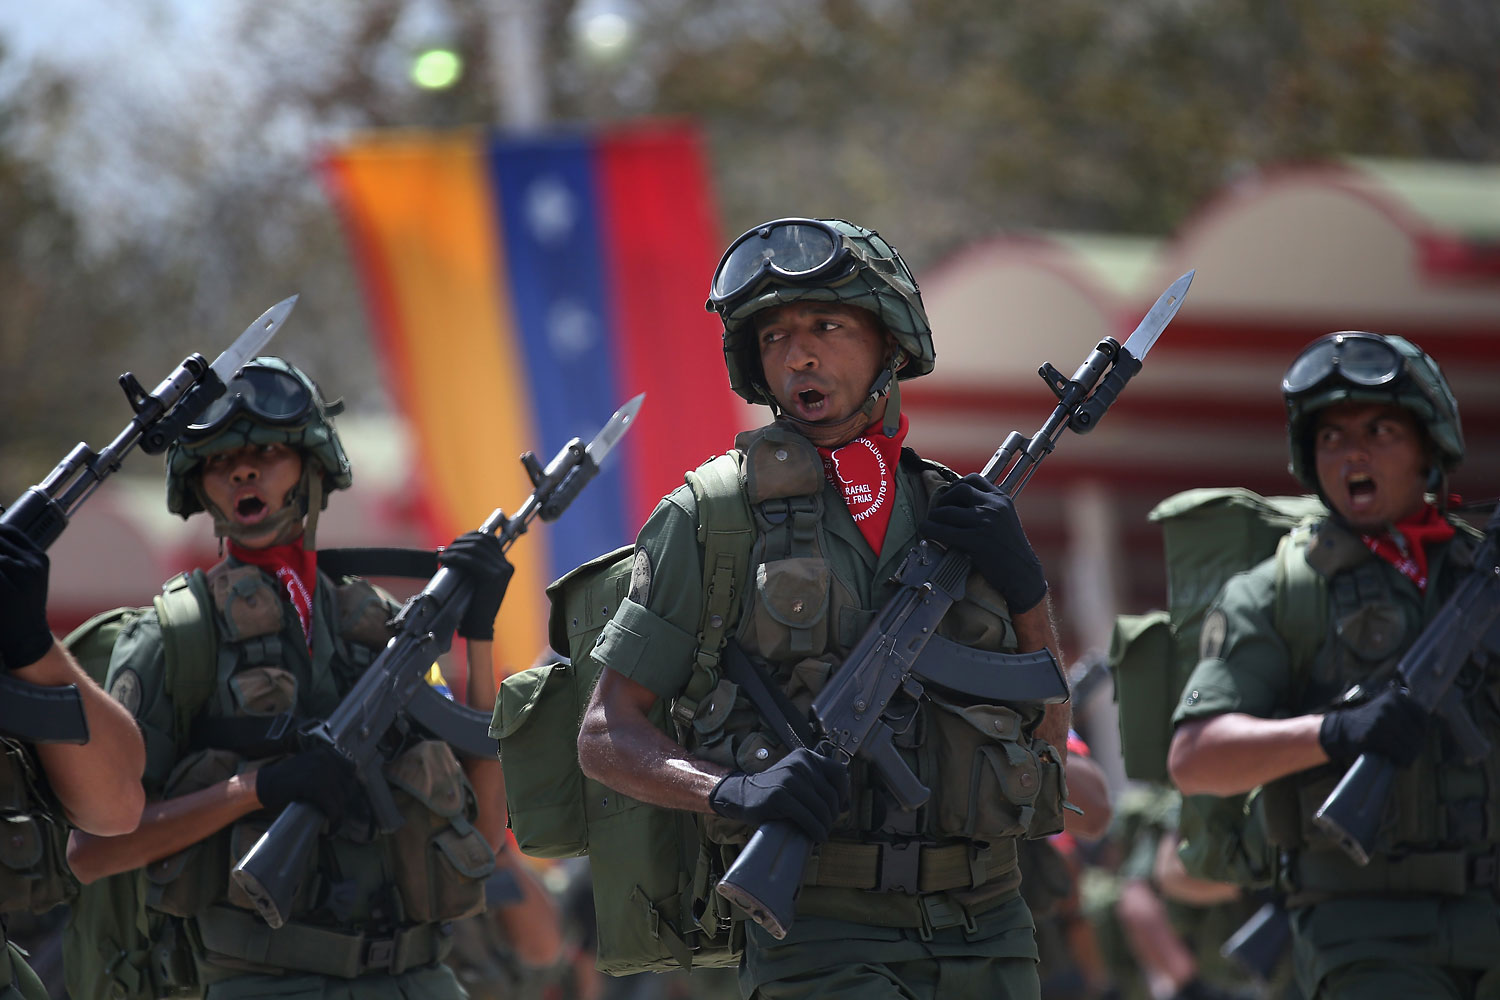 Venezuelan soldiers pass by dignitaries while marking the first anniversary of the death of Hugo Chavez on March 5, 2014 in Caracas.